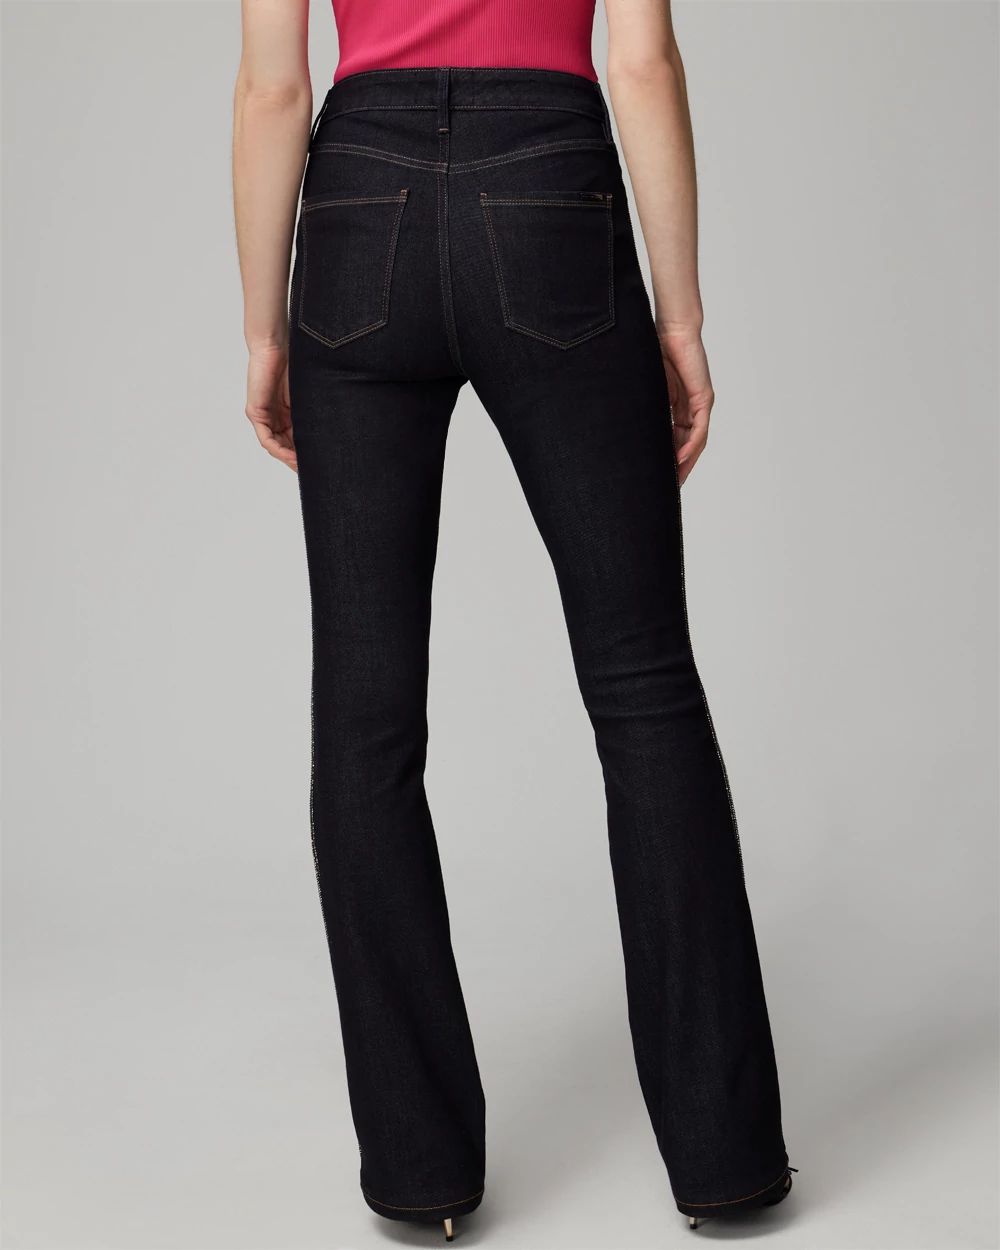 Petite High Rise Sculpt Embellished Flare Jeans click to view larger image.